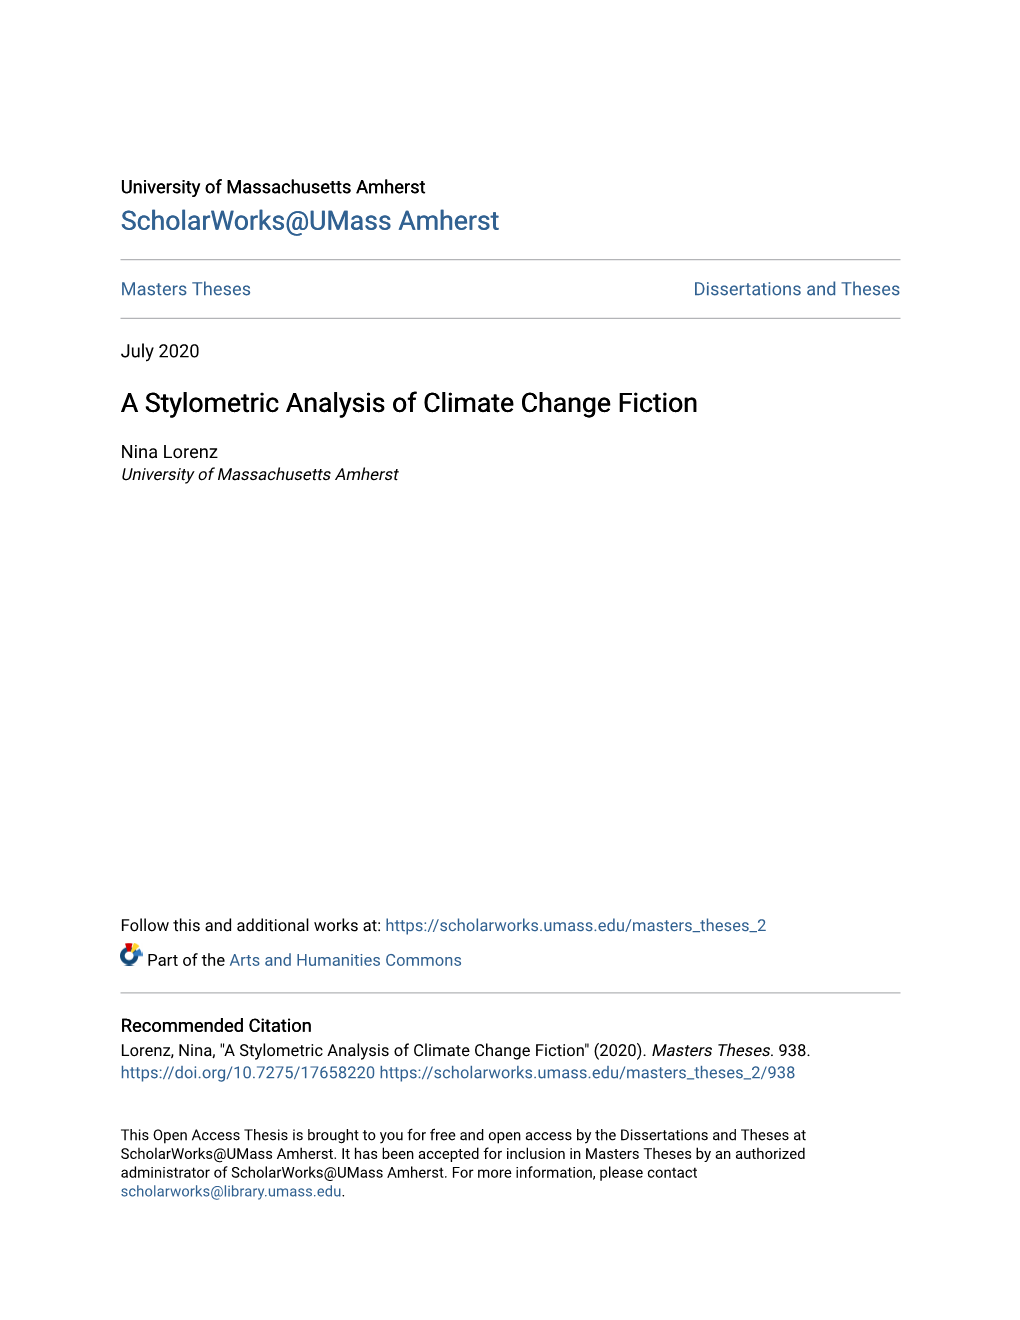 A Stylometric Analysis of Climate Change Fiction